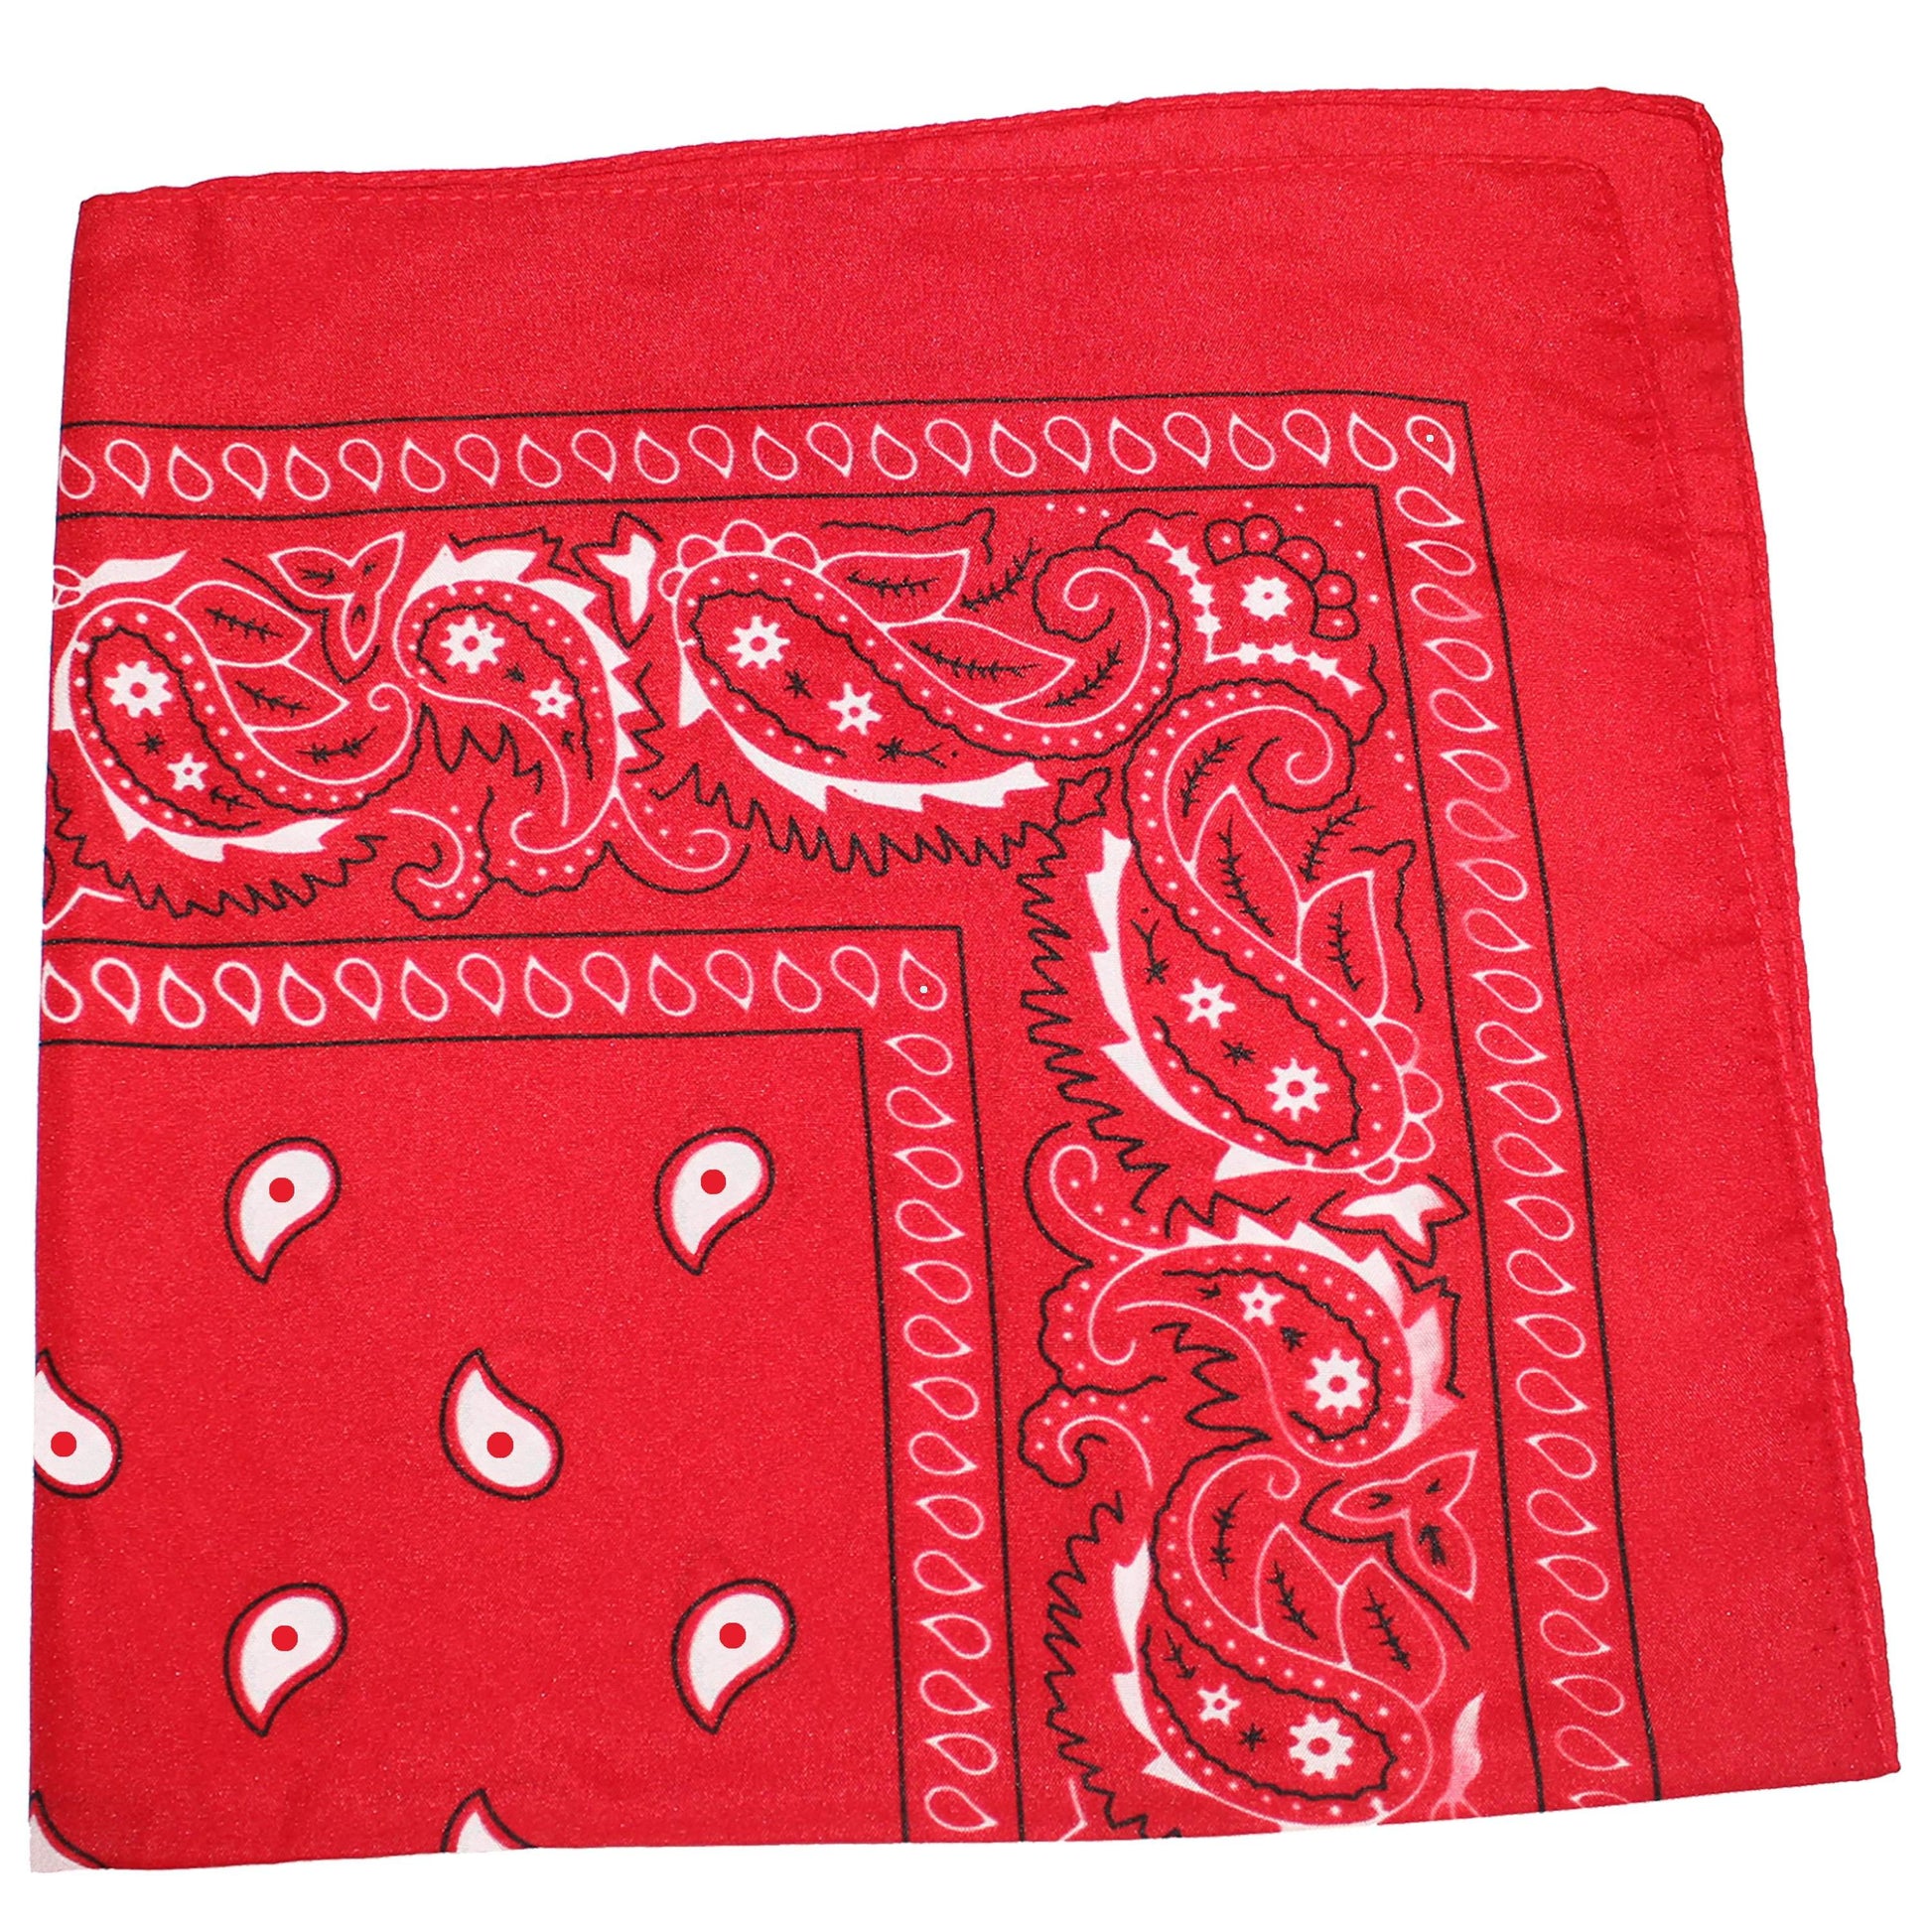 Pack of 6 X-Large Paisley Cotton Printed Bandana - 27 x 27 inches